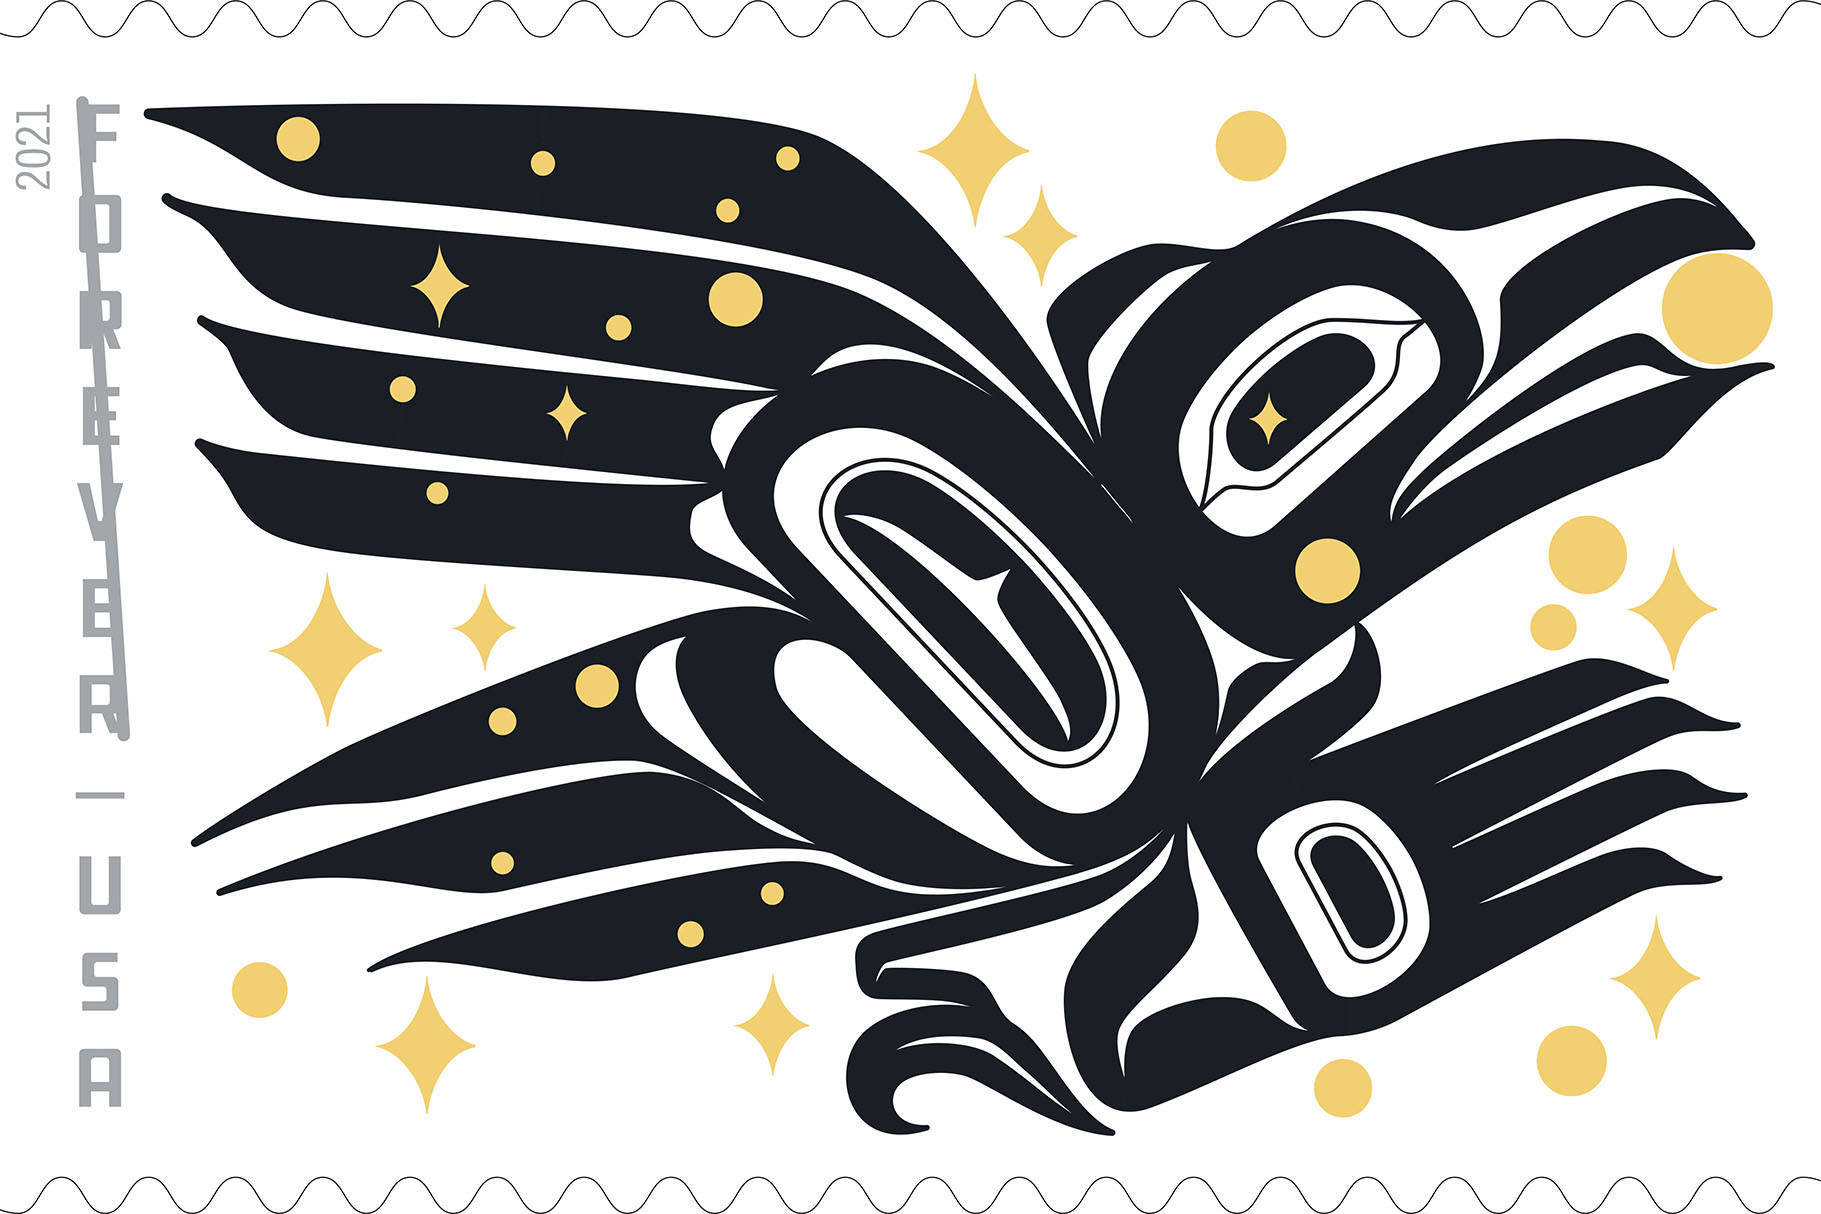 Rico Lanáat’ Worl’s “Raven Story Forever” design is shown here. There will be a release ceremony for the stamp on Friday. (Courtesy Image / Sealaska Heritage Institute)